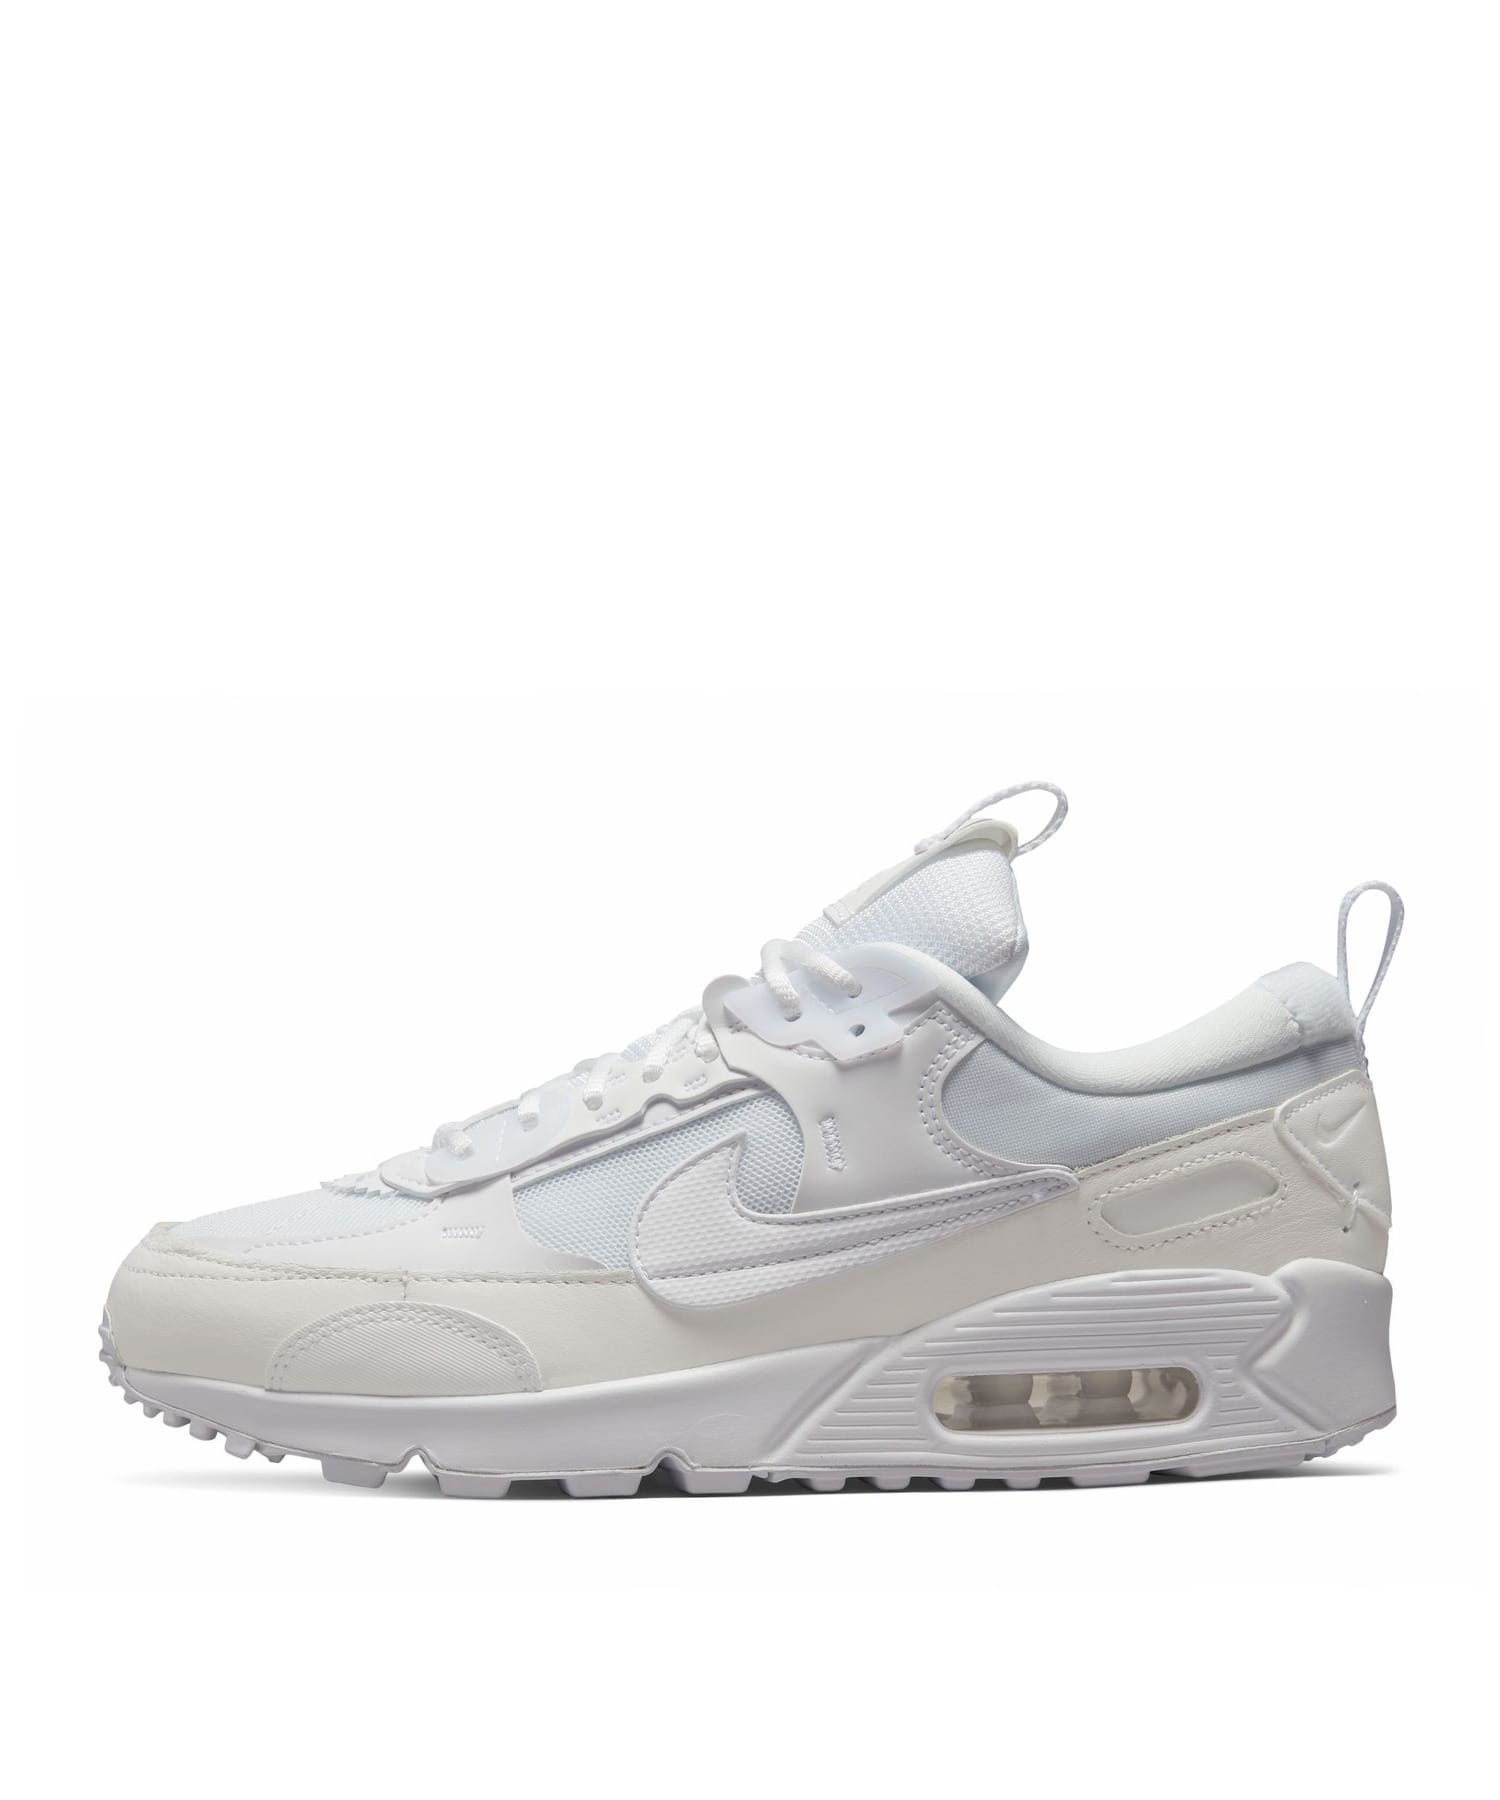 NIKE / AIR MAX 90 ONLINE STORE｜エストネーション 公式通販